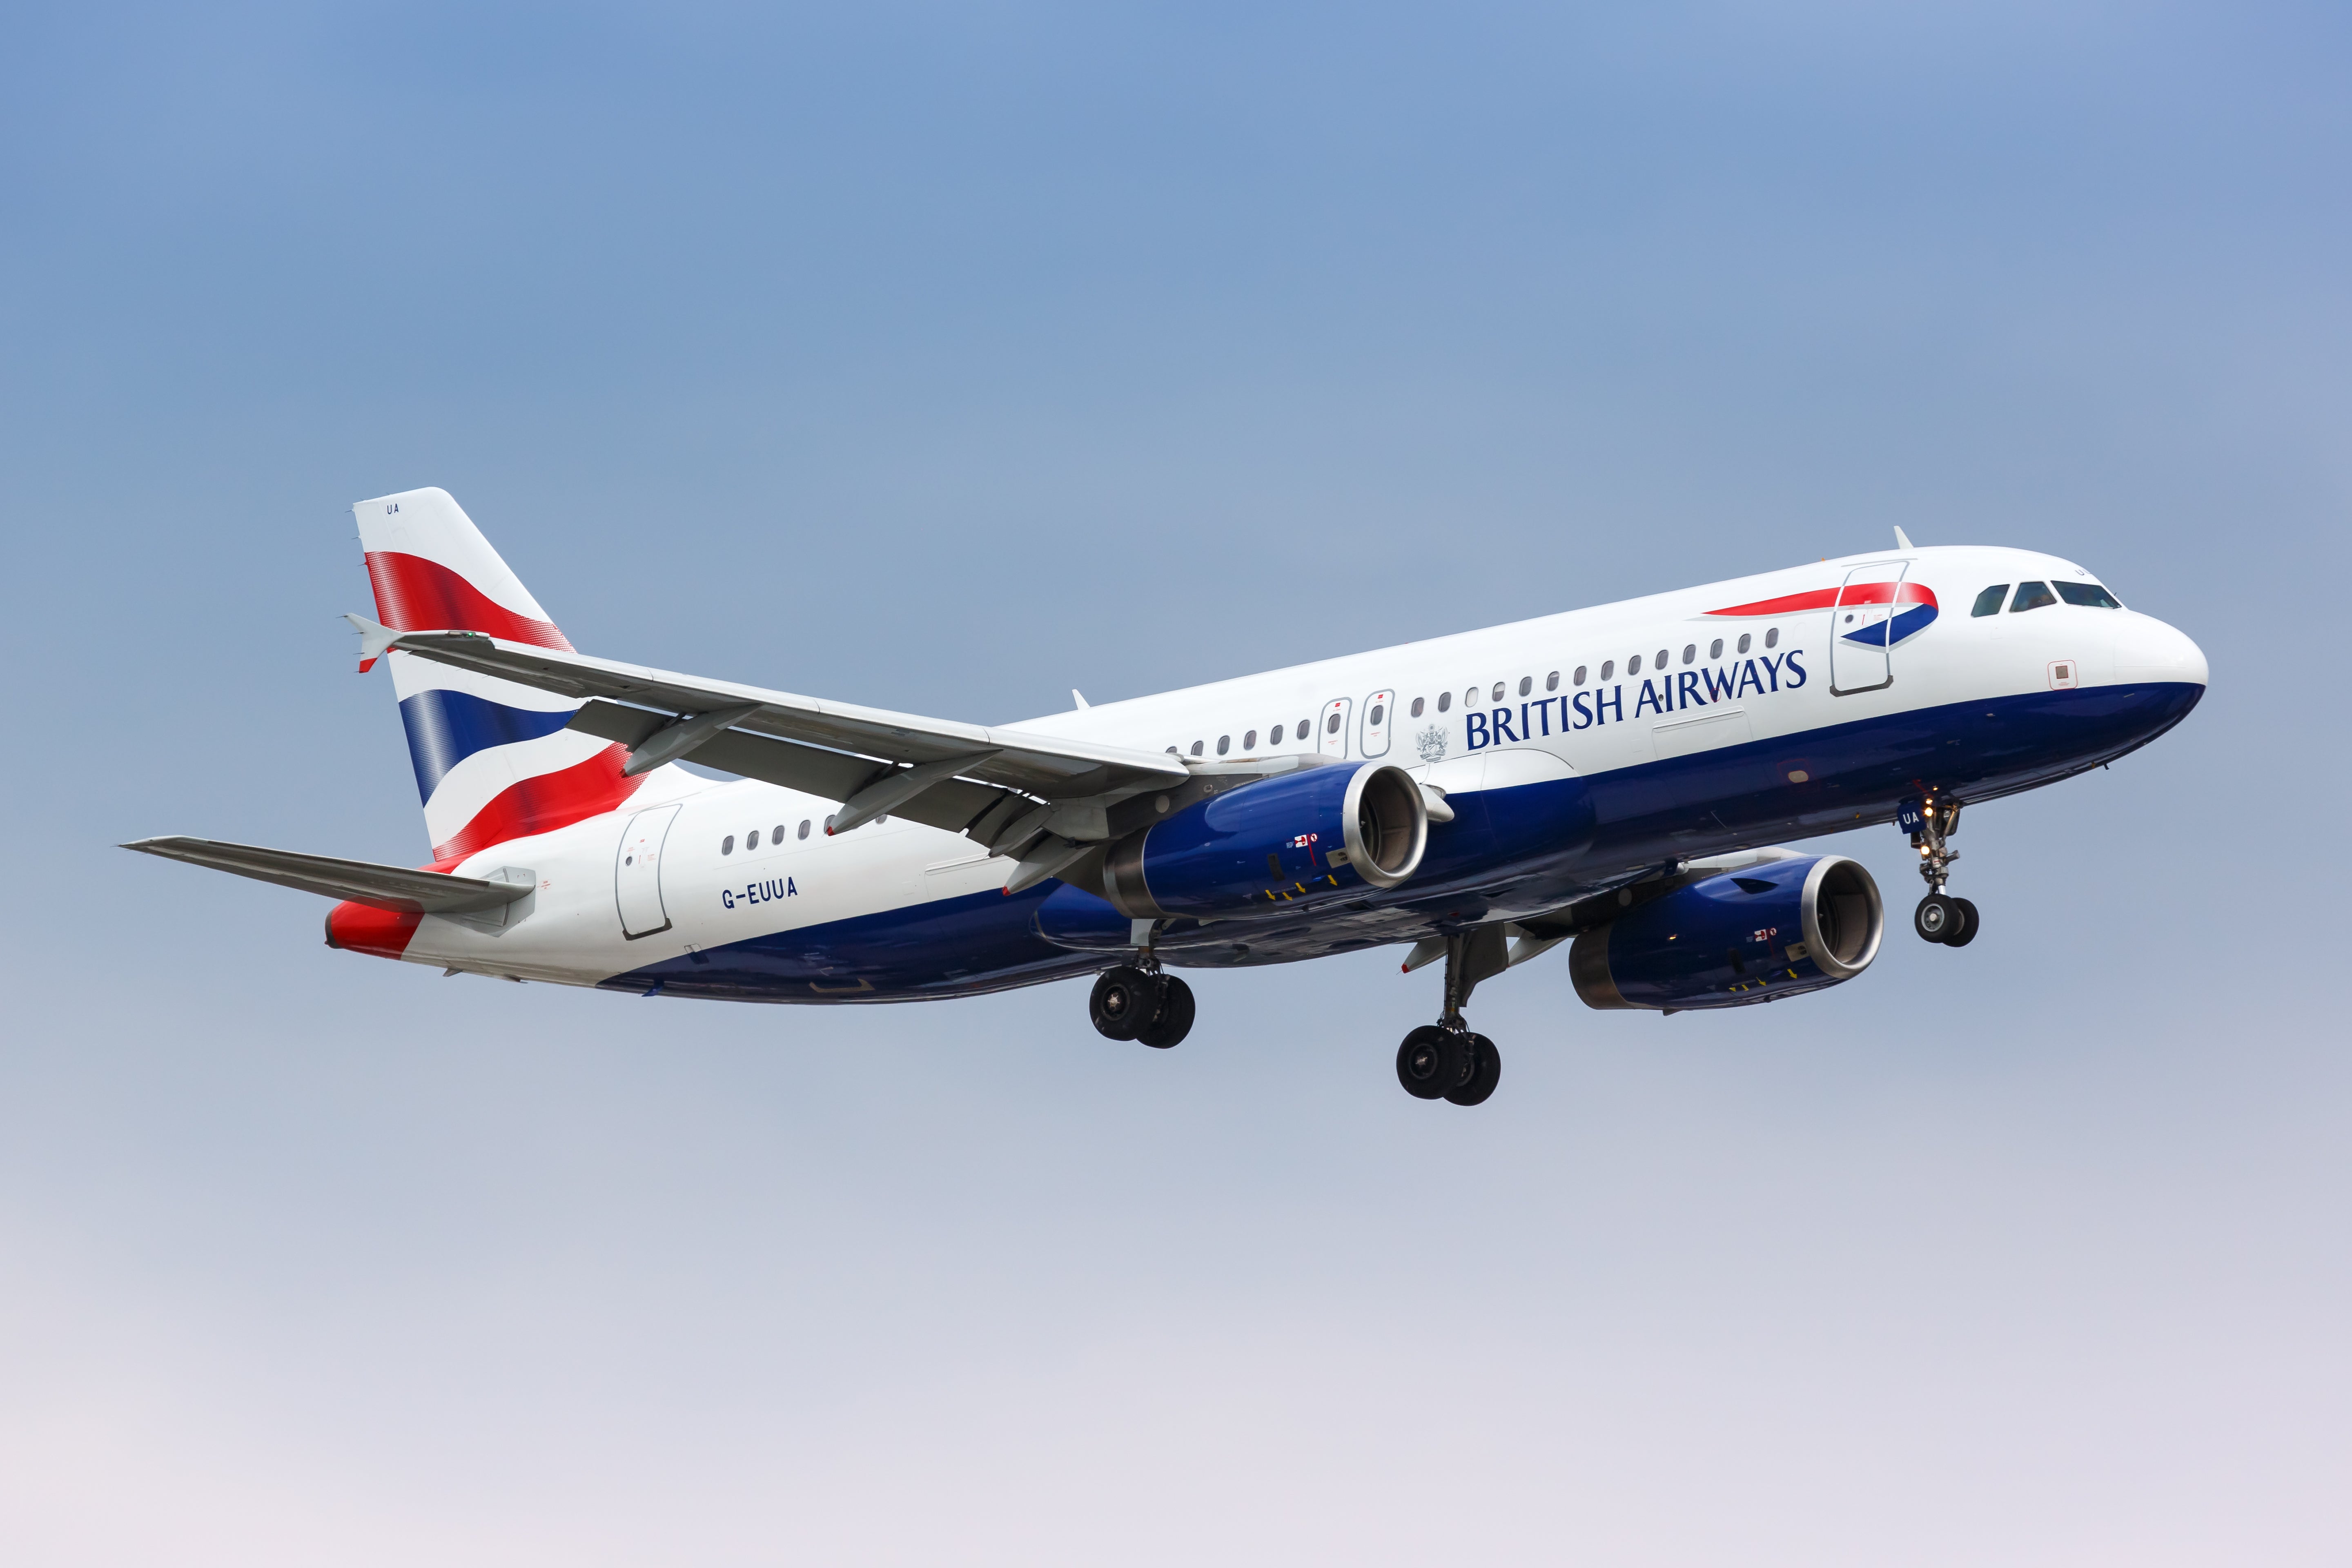 You may not be catching a BA flight even if that’s what you think you’ve bought